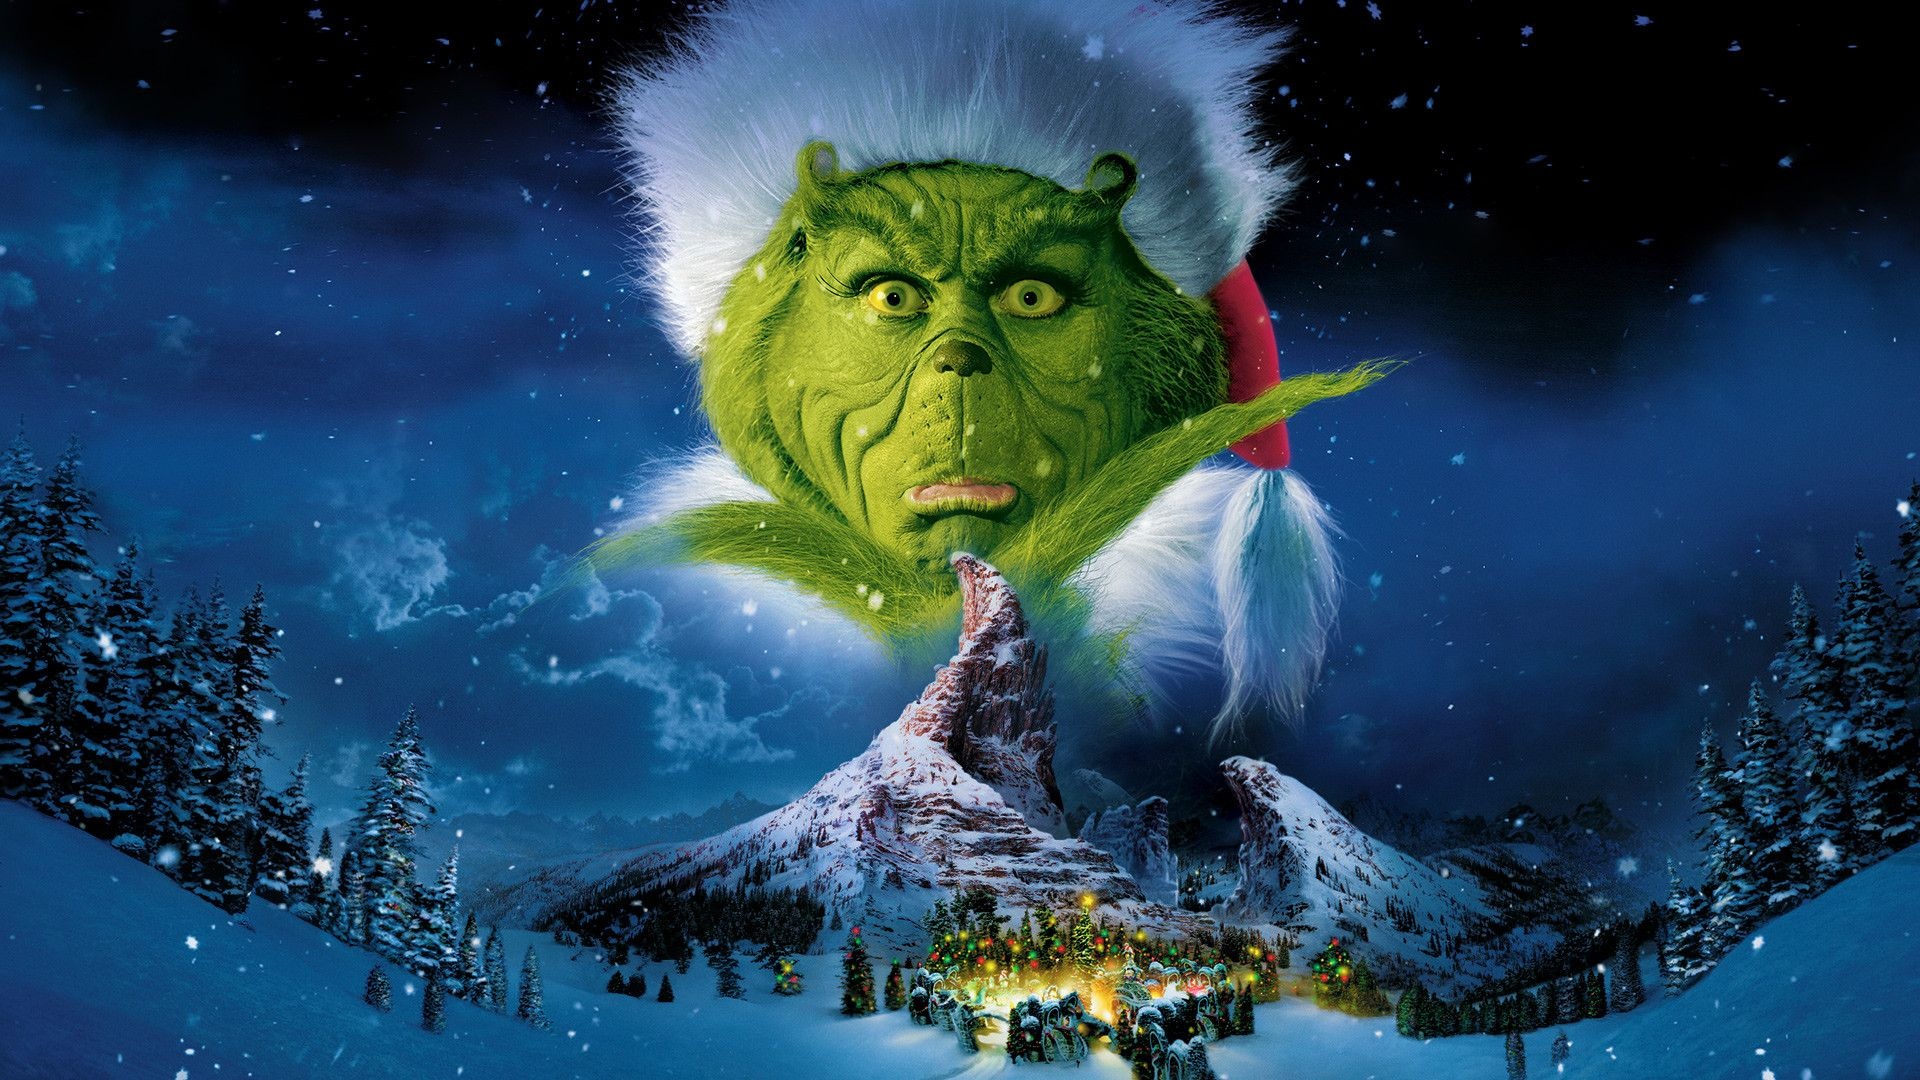 Christmas Grinch, Wallpapers, Top free, Christmas background, 1920x1080 Full HD Desktop